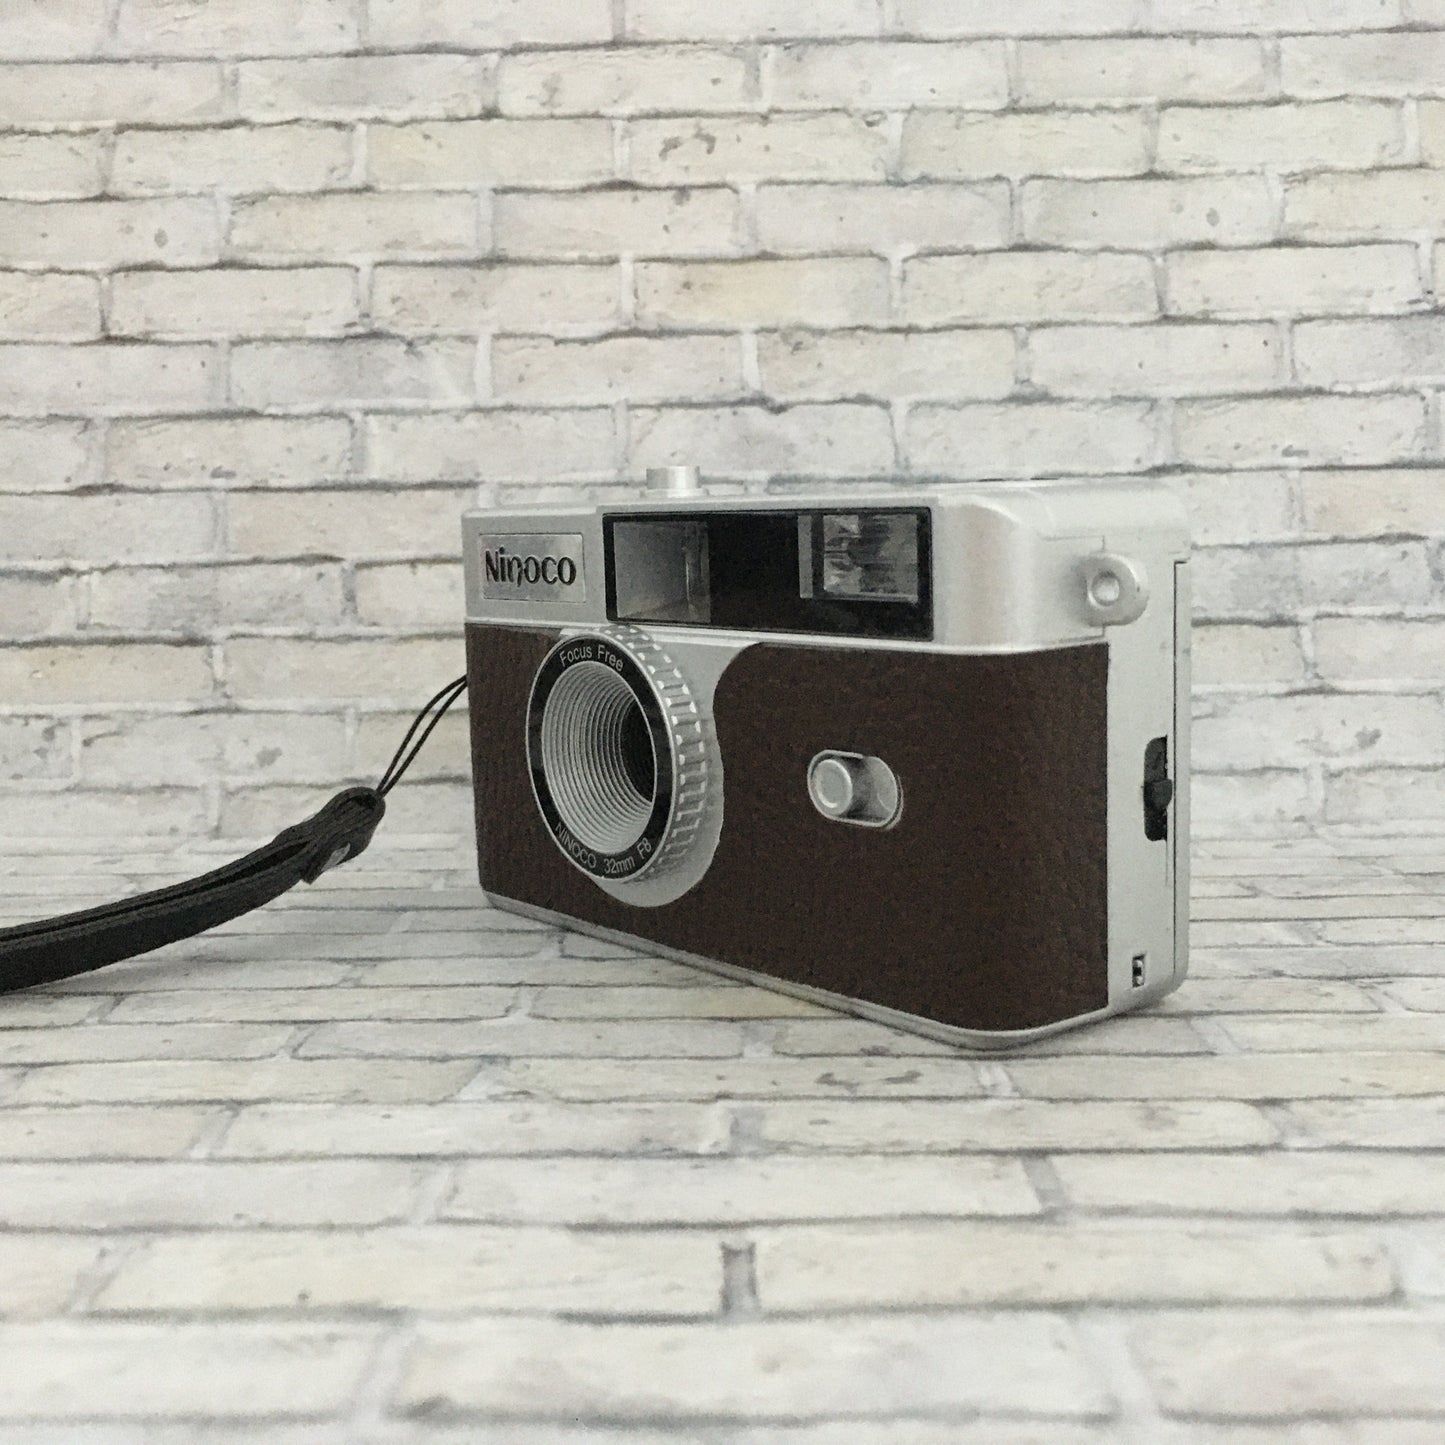 Point & shoot ! Brand new 35mm film camera with chocolate brown leather